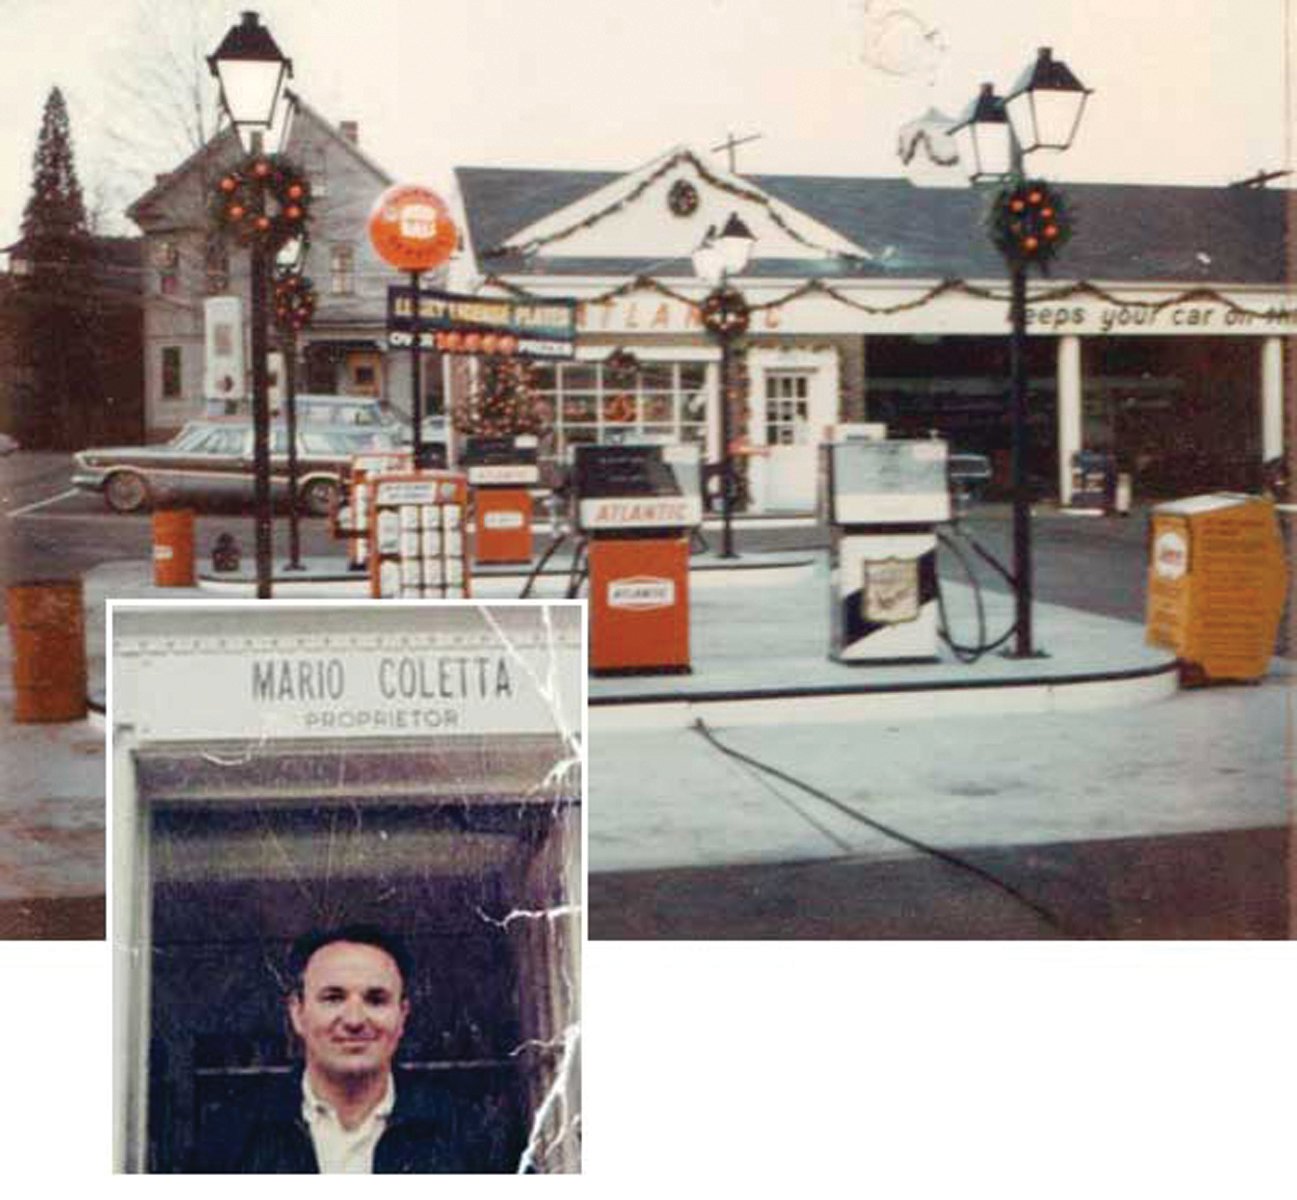 DEBUT STATION: In April 1962, Mario Coletta opened his first station on the Brown University Campus.